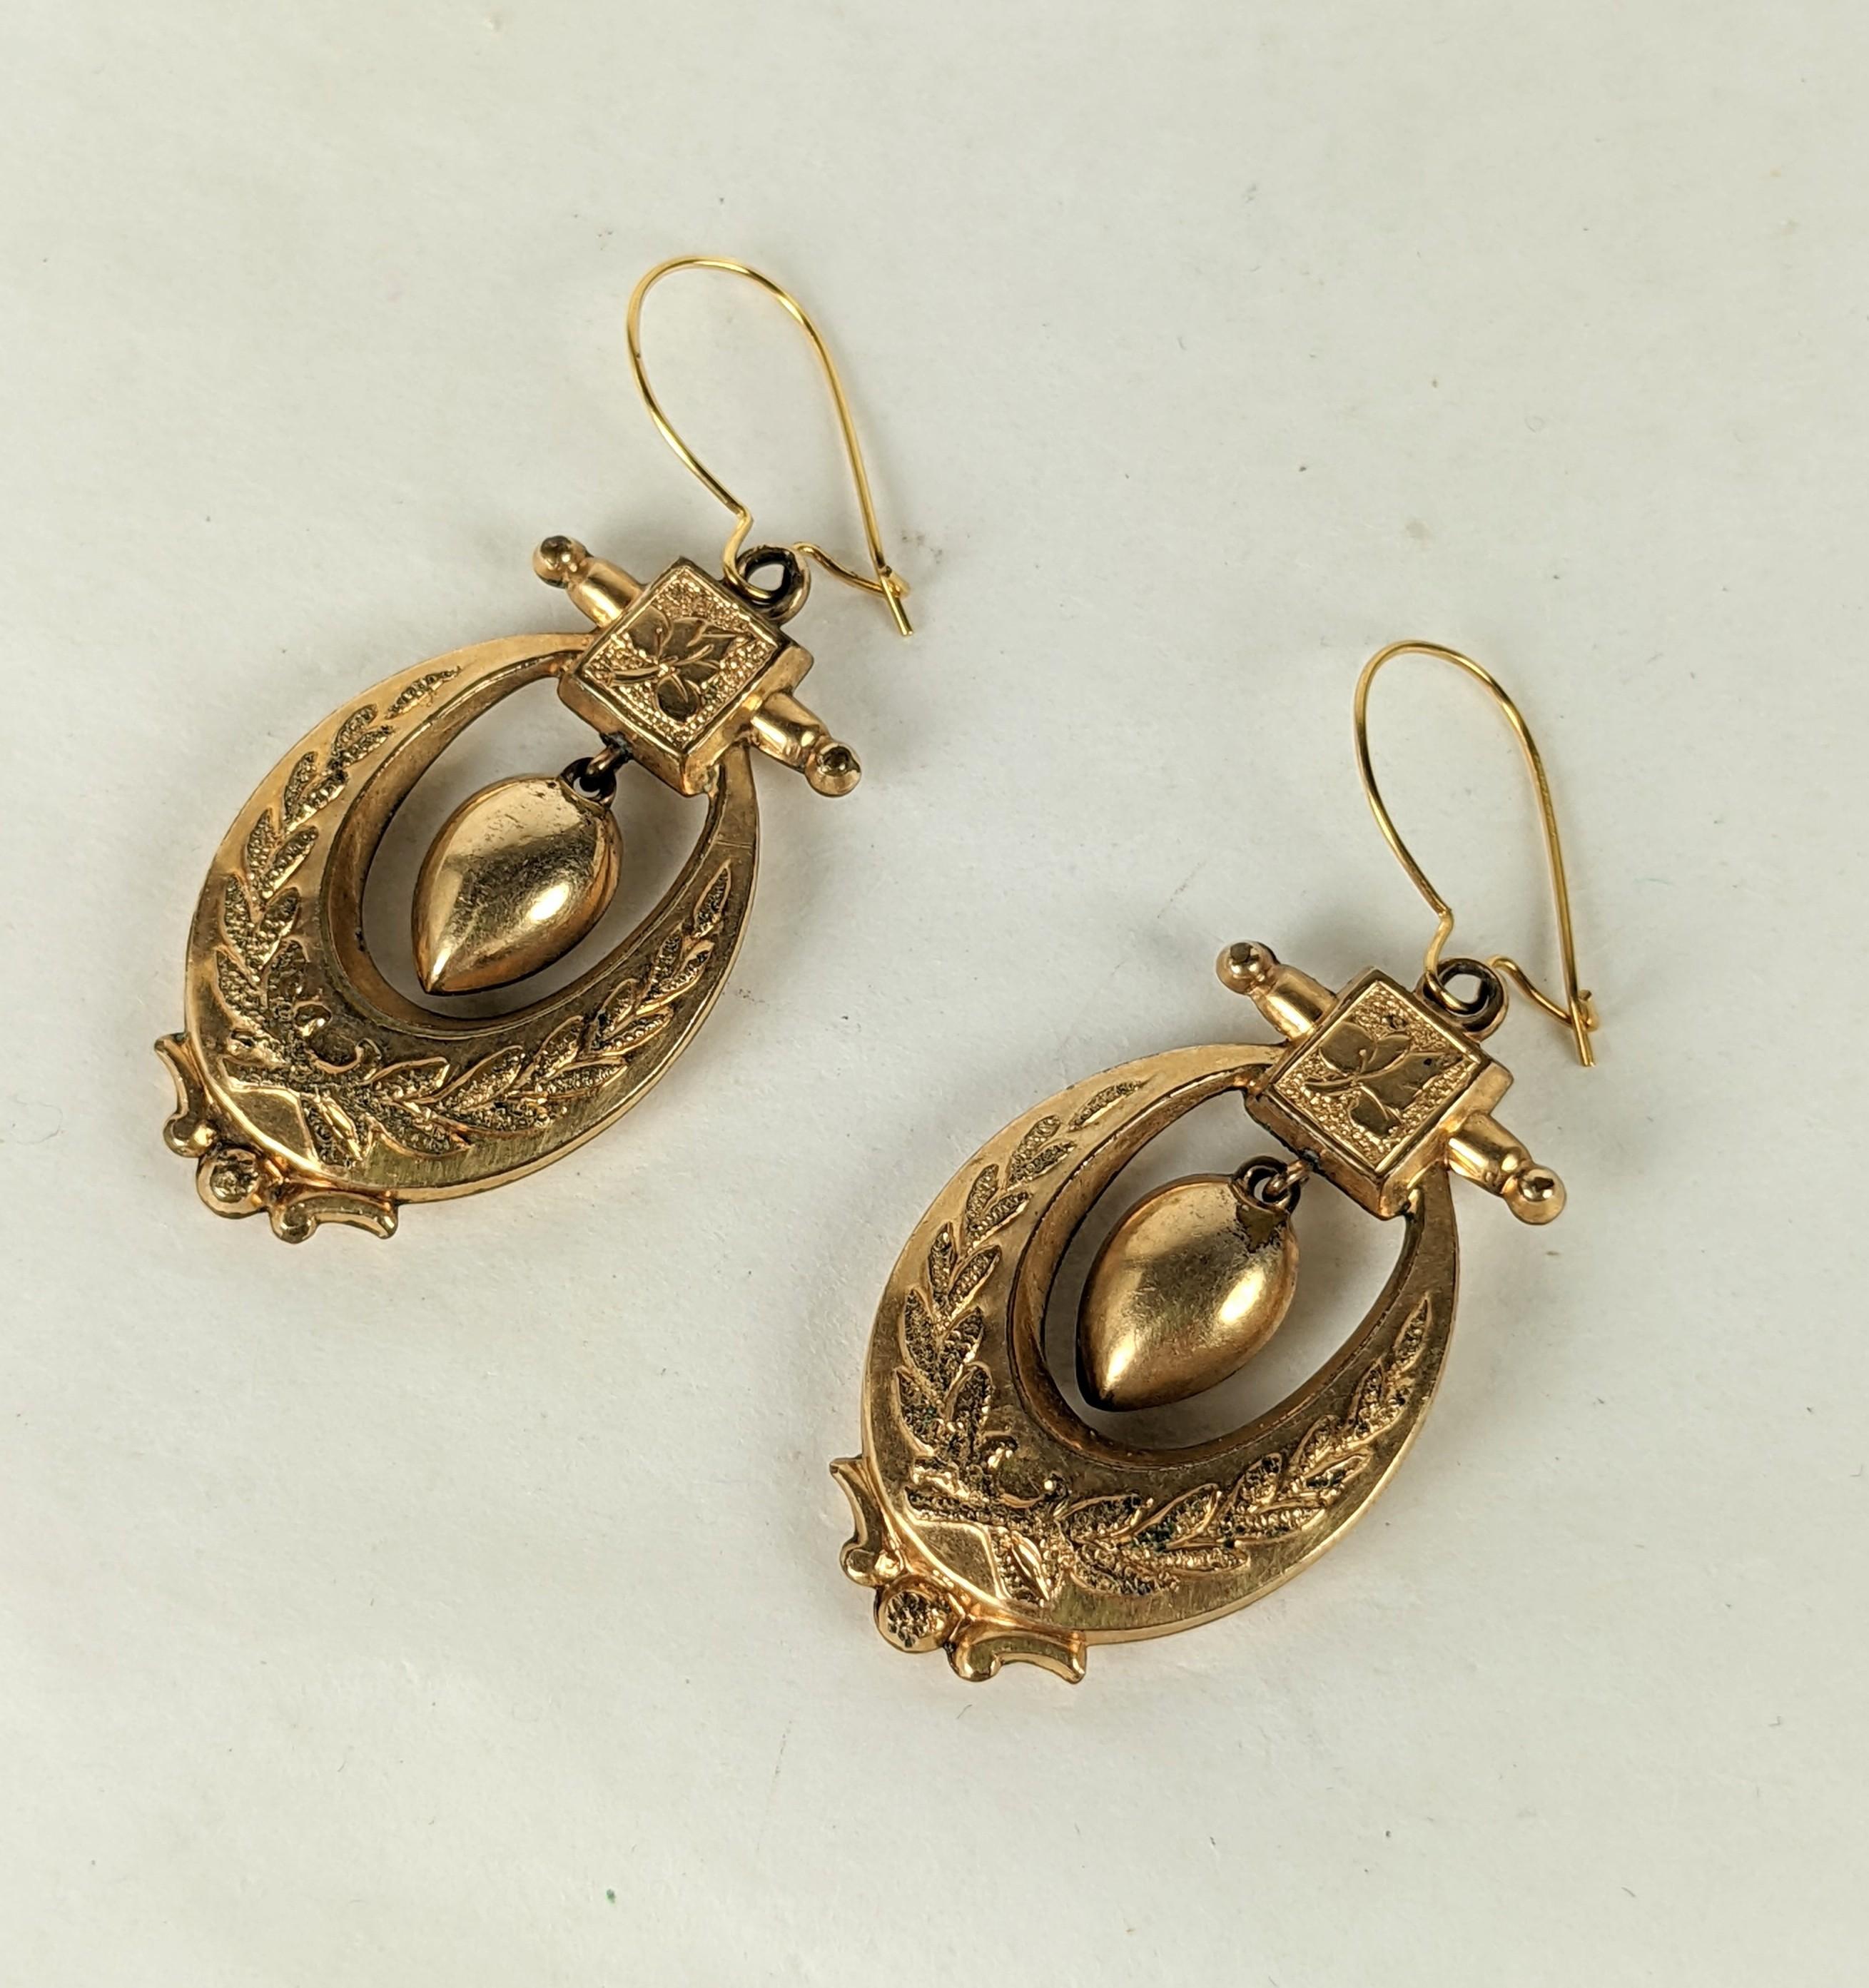 Charming Victorian Gold Filled Dangle Earrings from the late 19th Century. A pair of chased ovals with wreath motifs each have an urn shaped drop hanging from a leaf decorated motif. 
1880's USA. New wires. Motif 1